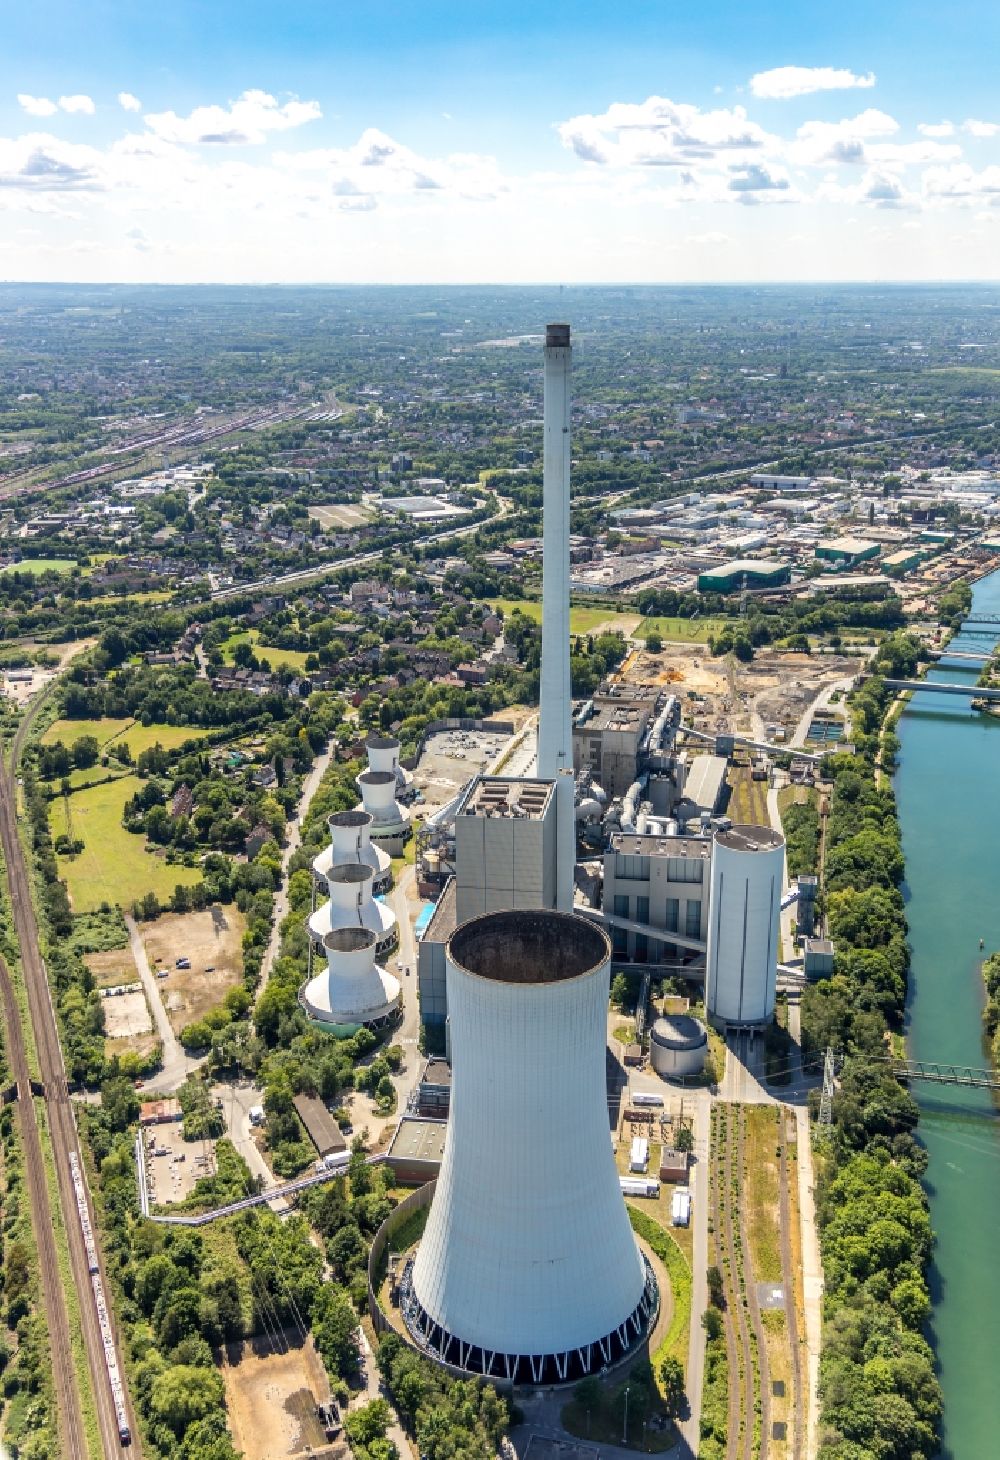 Aerial image Herne - Steag CHP group power plant on the Rhine-Herne Canal Herne in the state of North Rhine-Westphalia